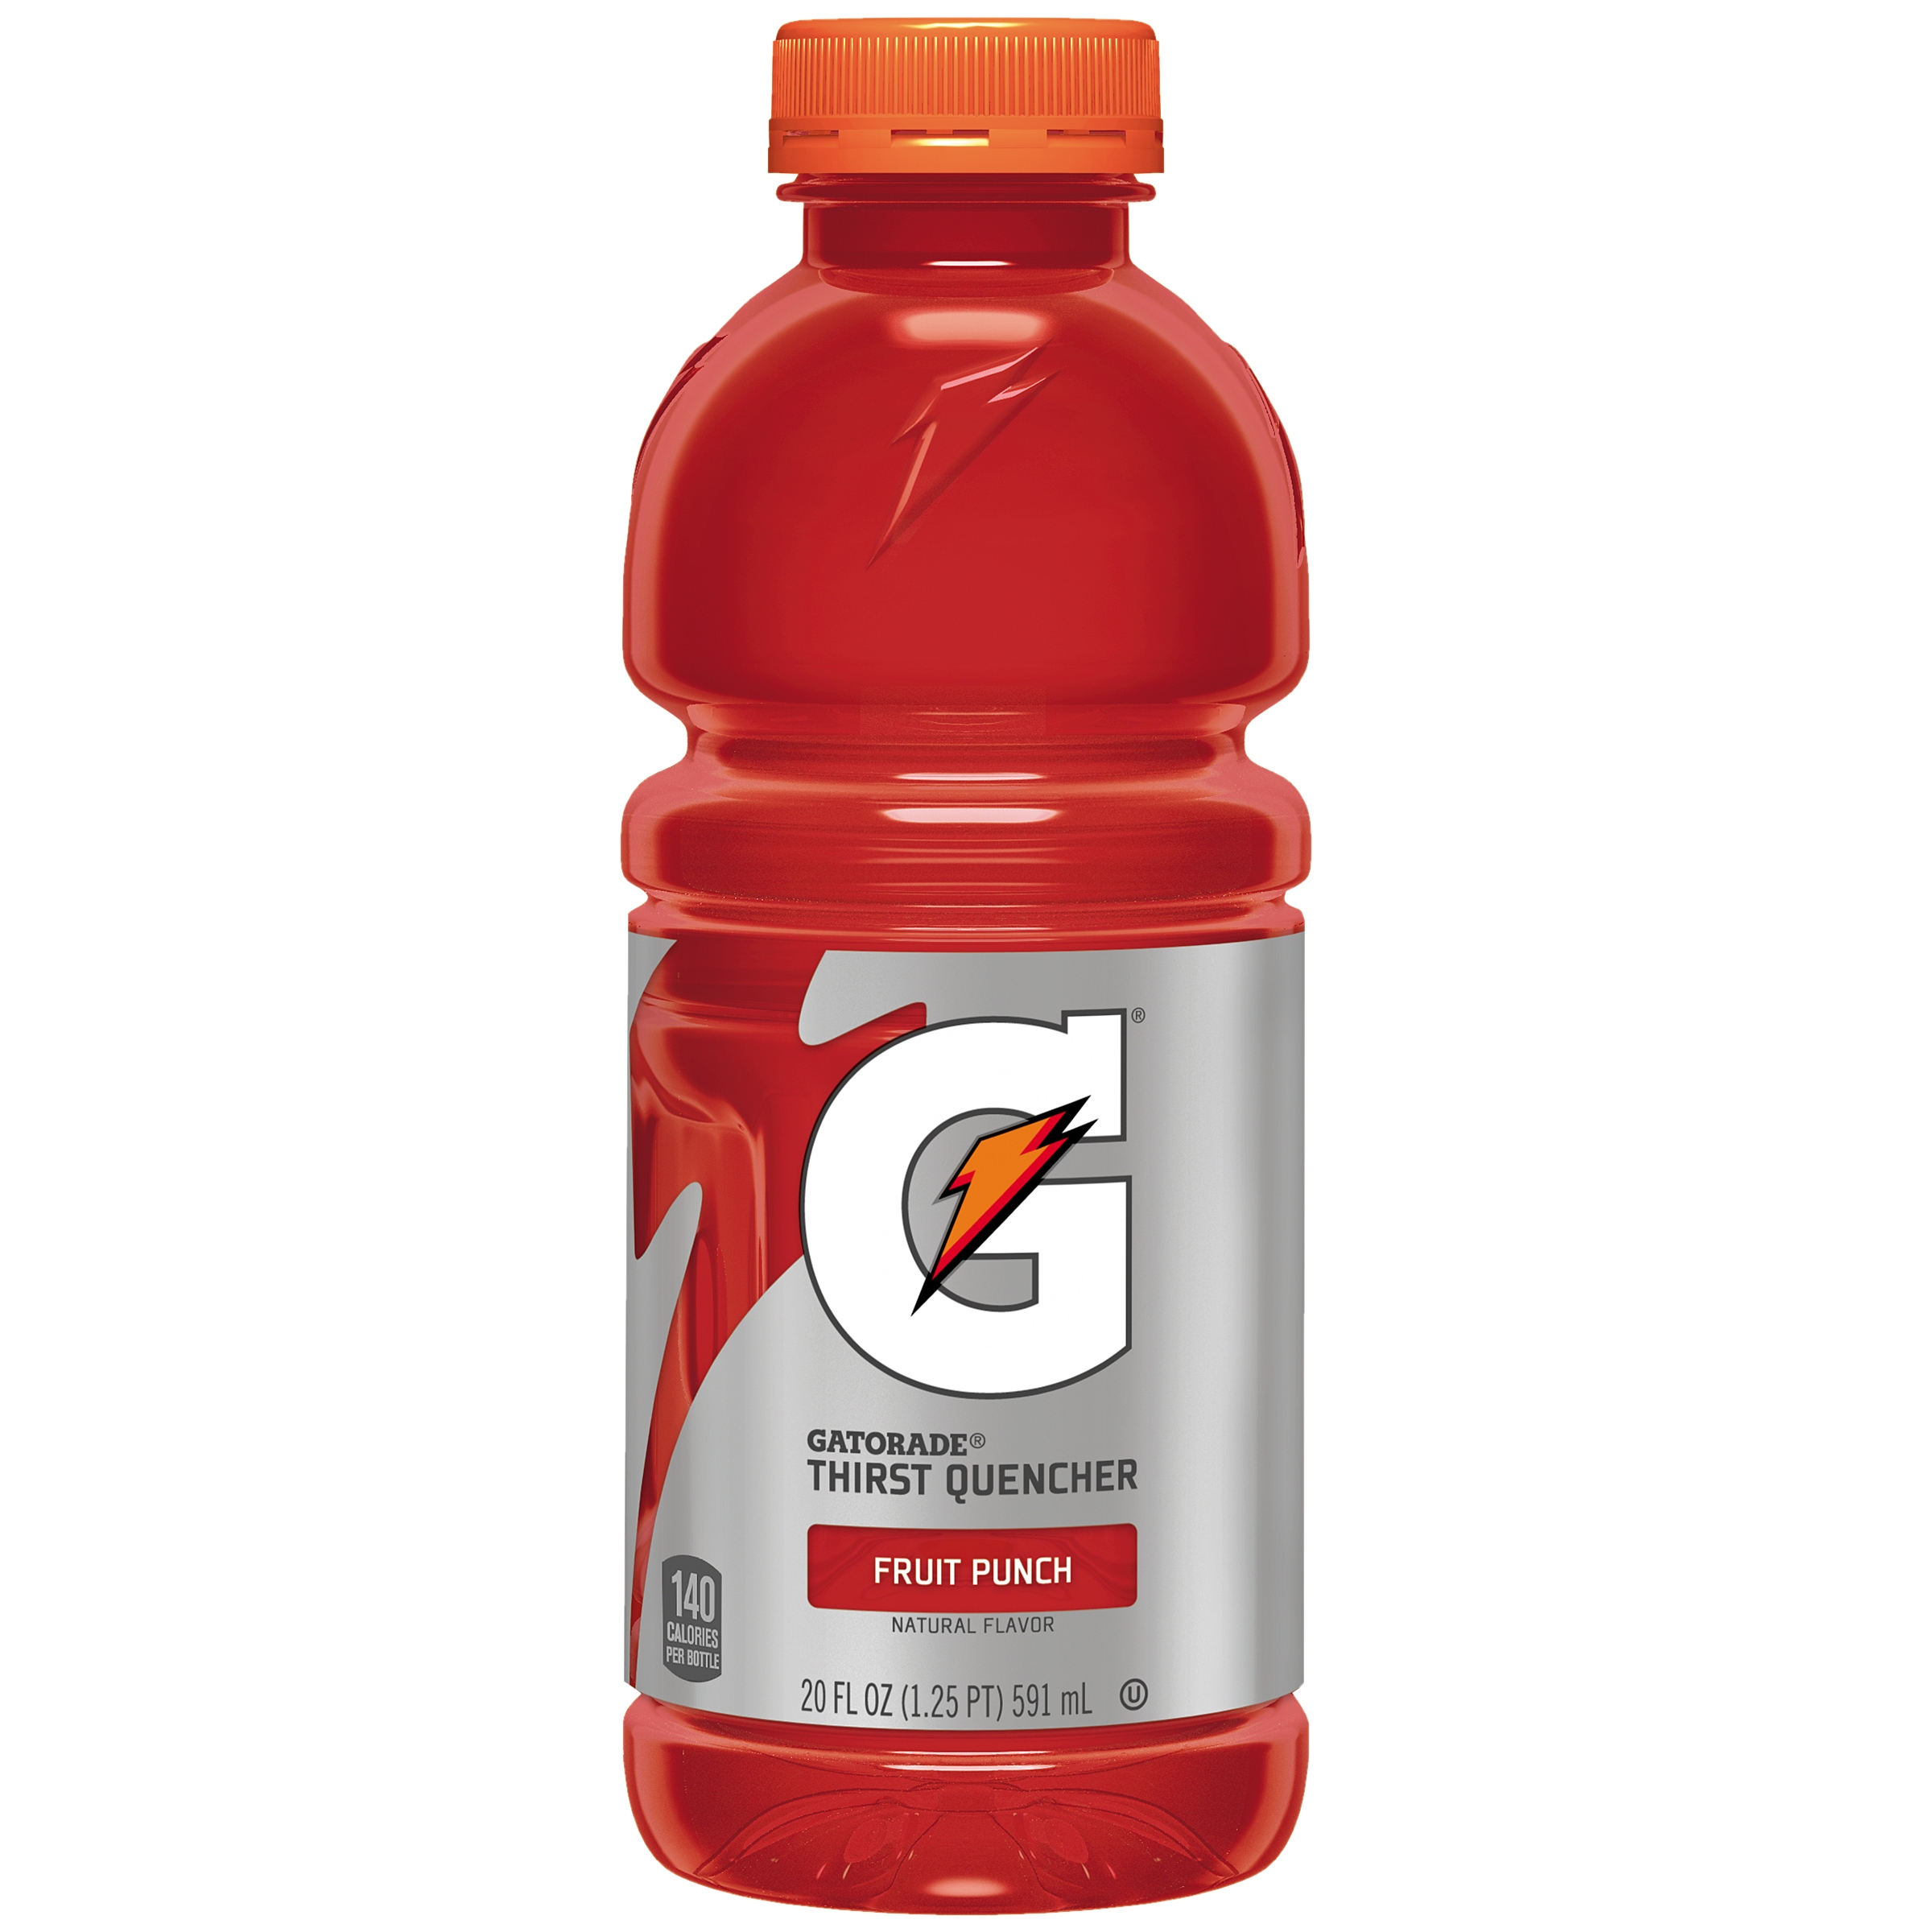 Gatorade Thirst Quencher, Fruit Punch Sports Drinks, 20 fl oz, 8 Count Bottles - image 3 of 9